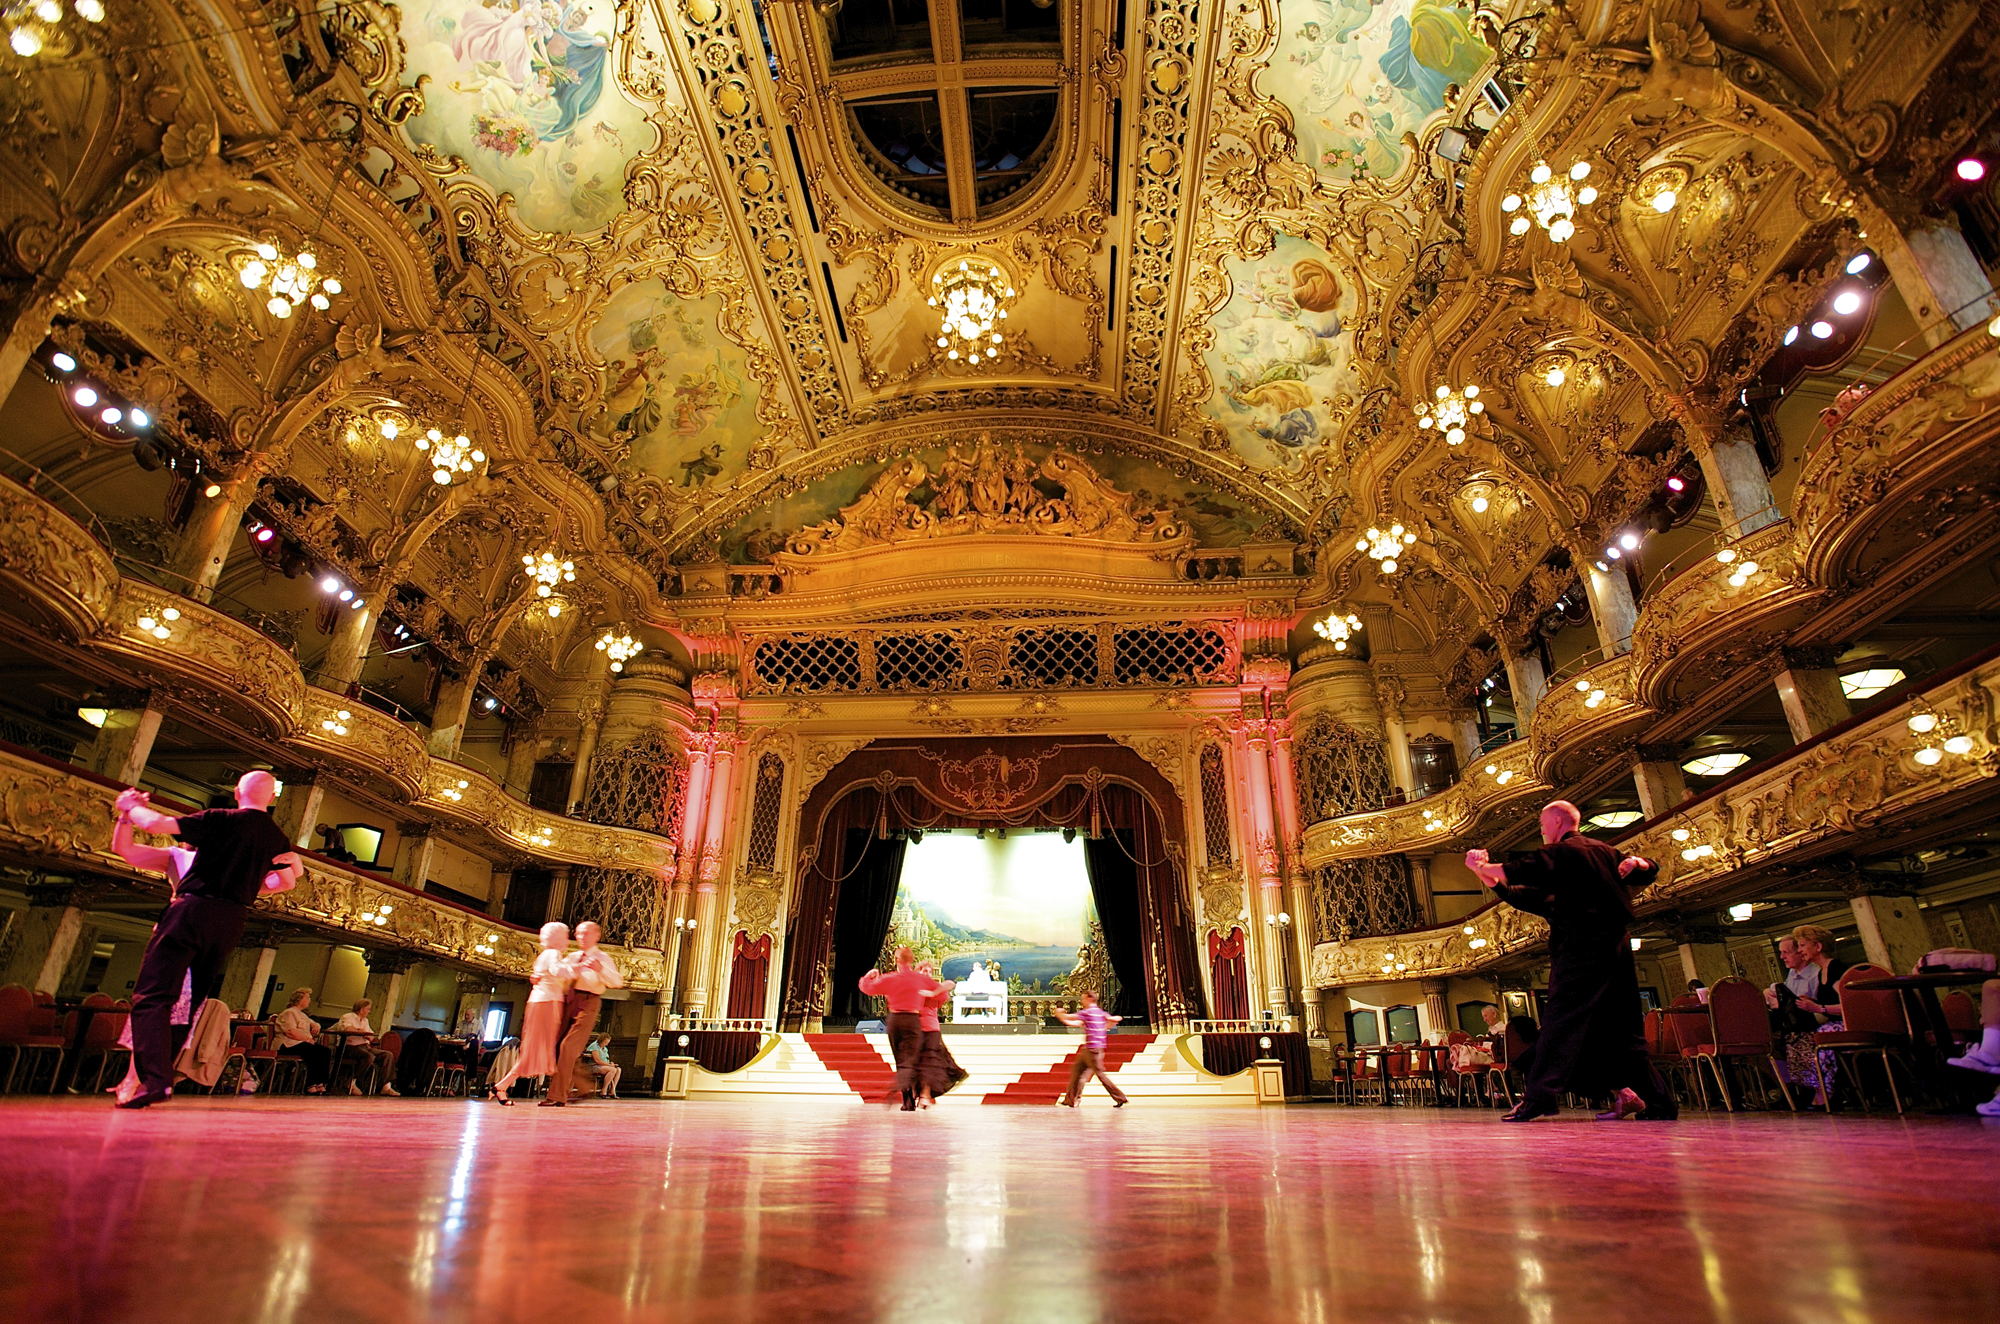 Blackpool Tower Attraction Ballroom With Dancers